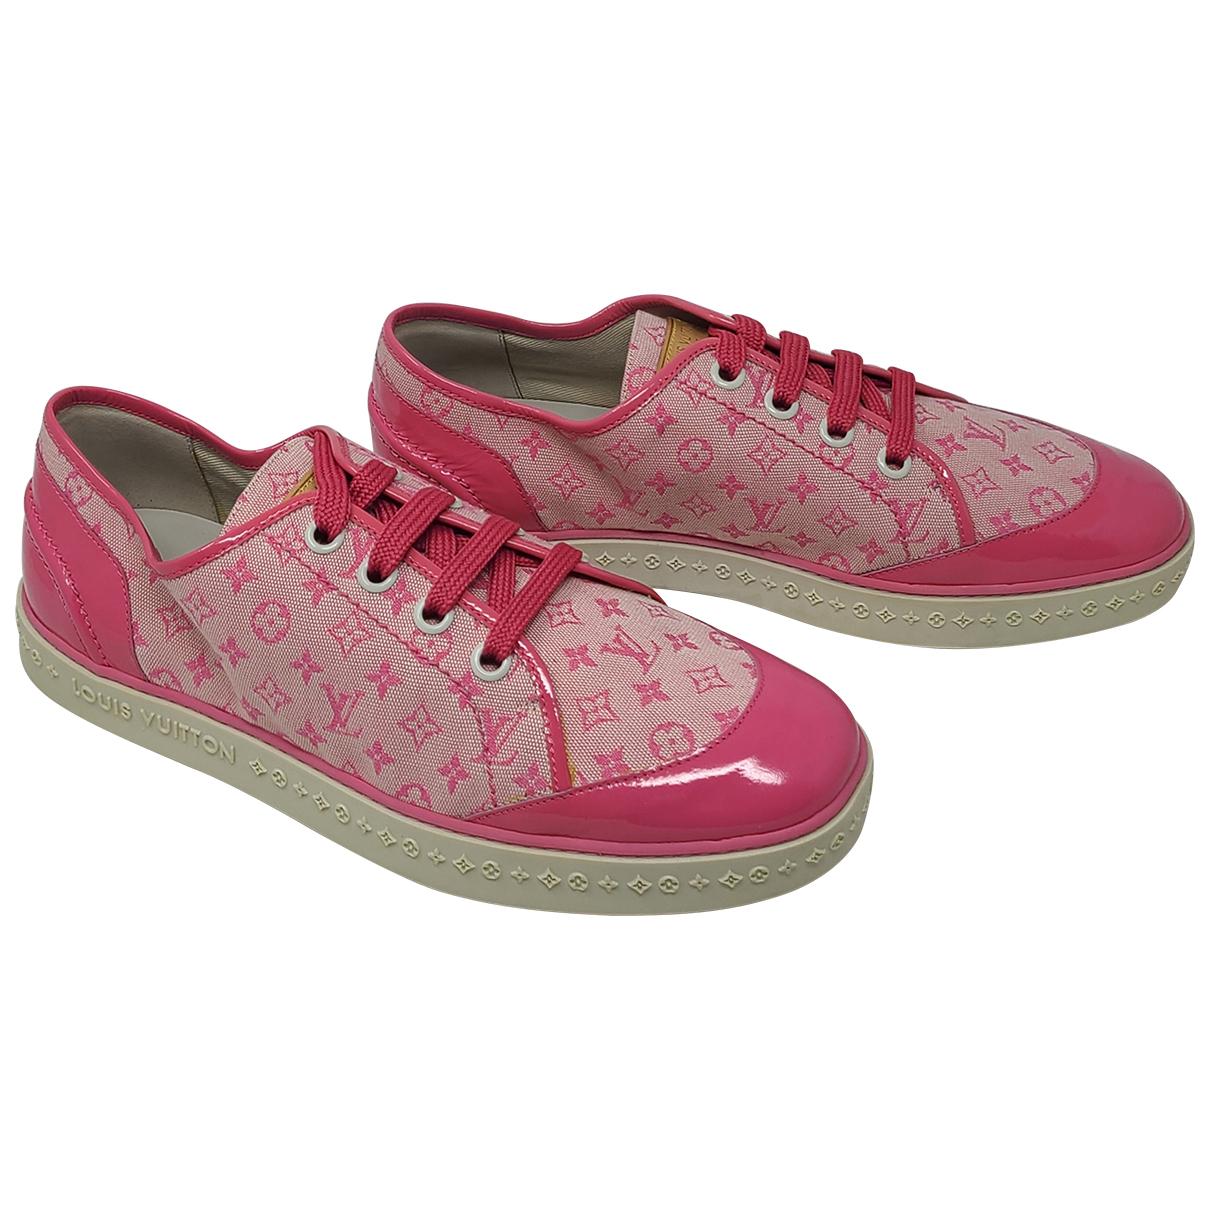 Louis Vuitton Authentic Women's Shoes Size 5 Pink Leather Sneakers Very  Clean